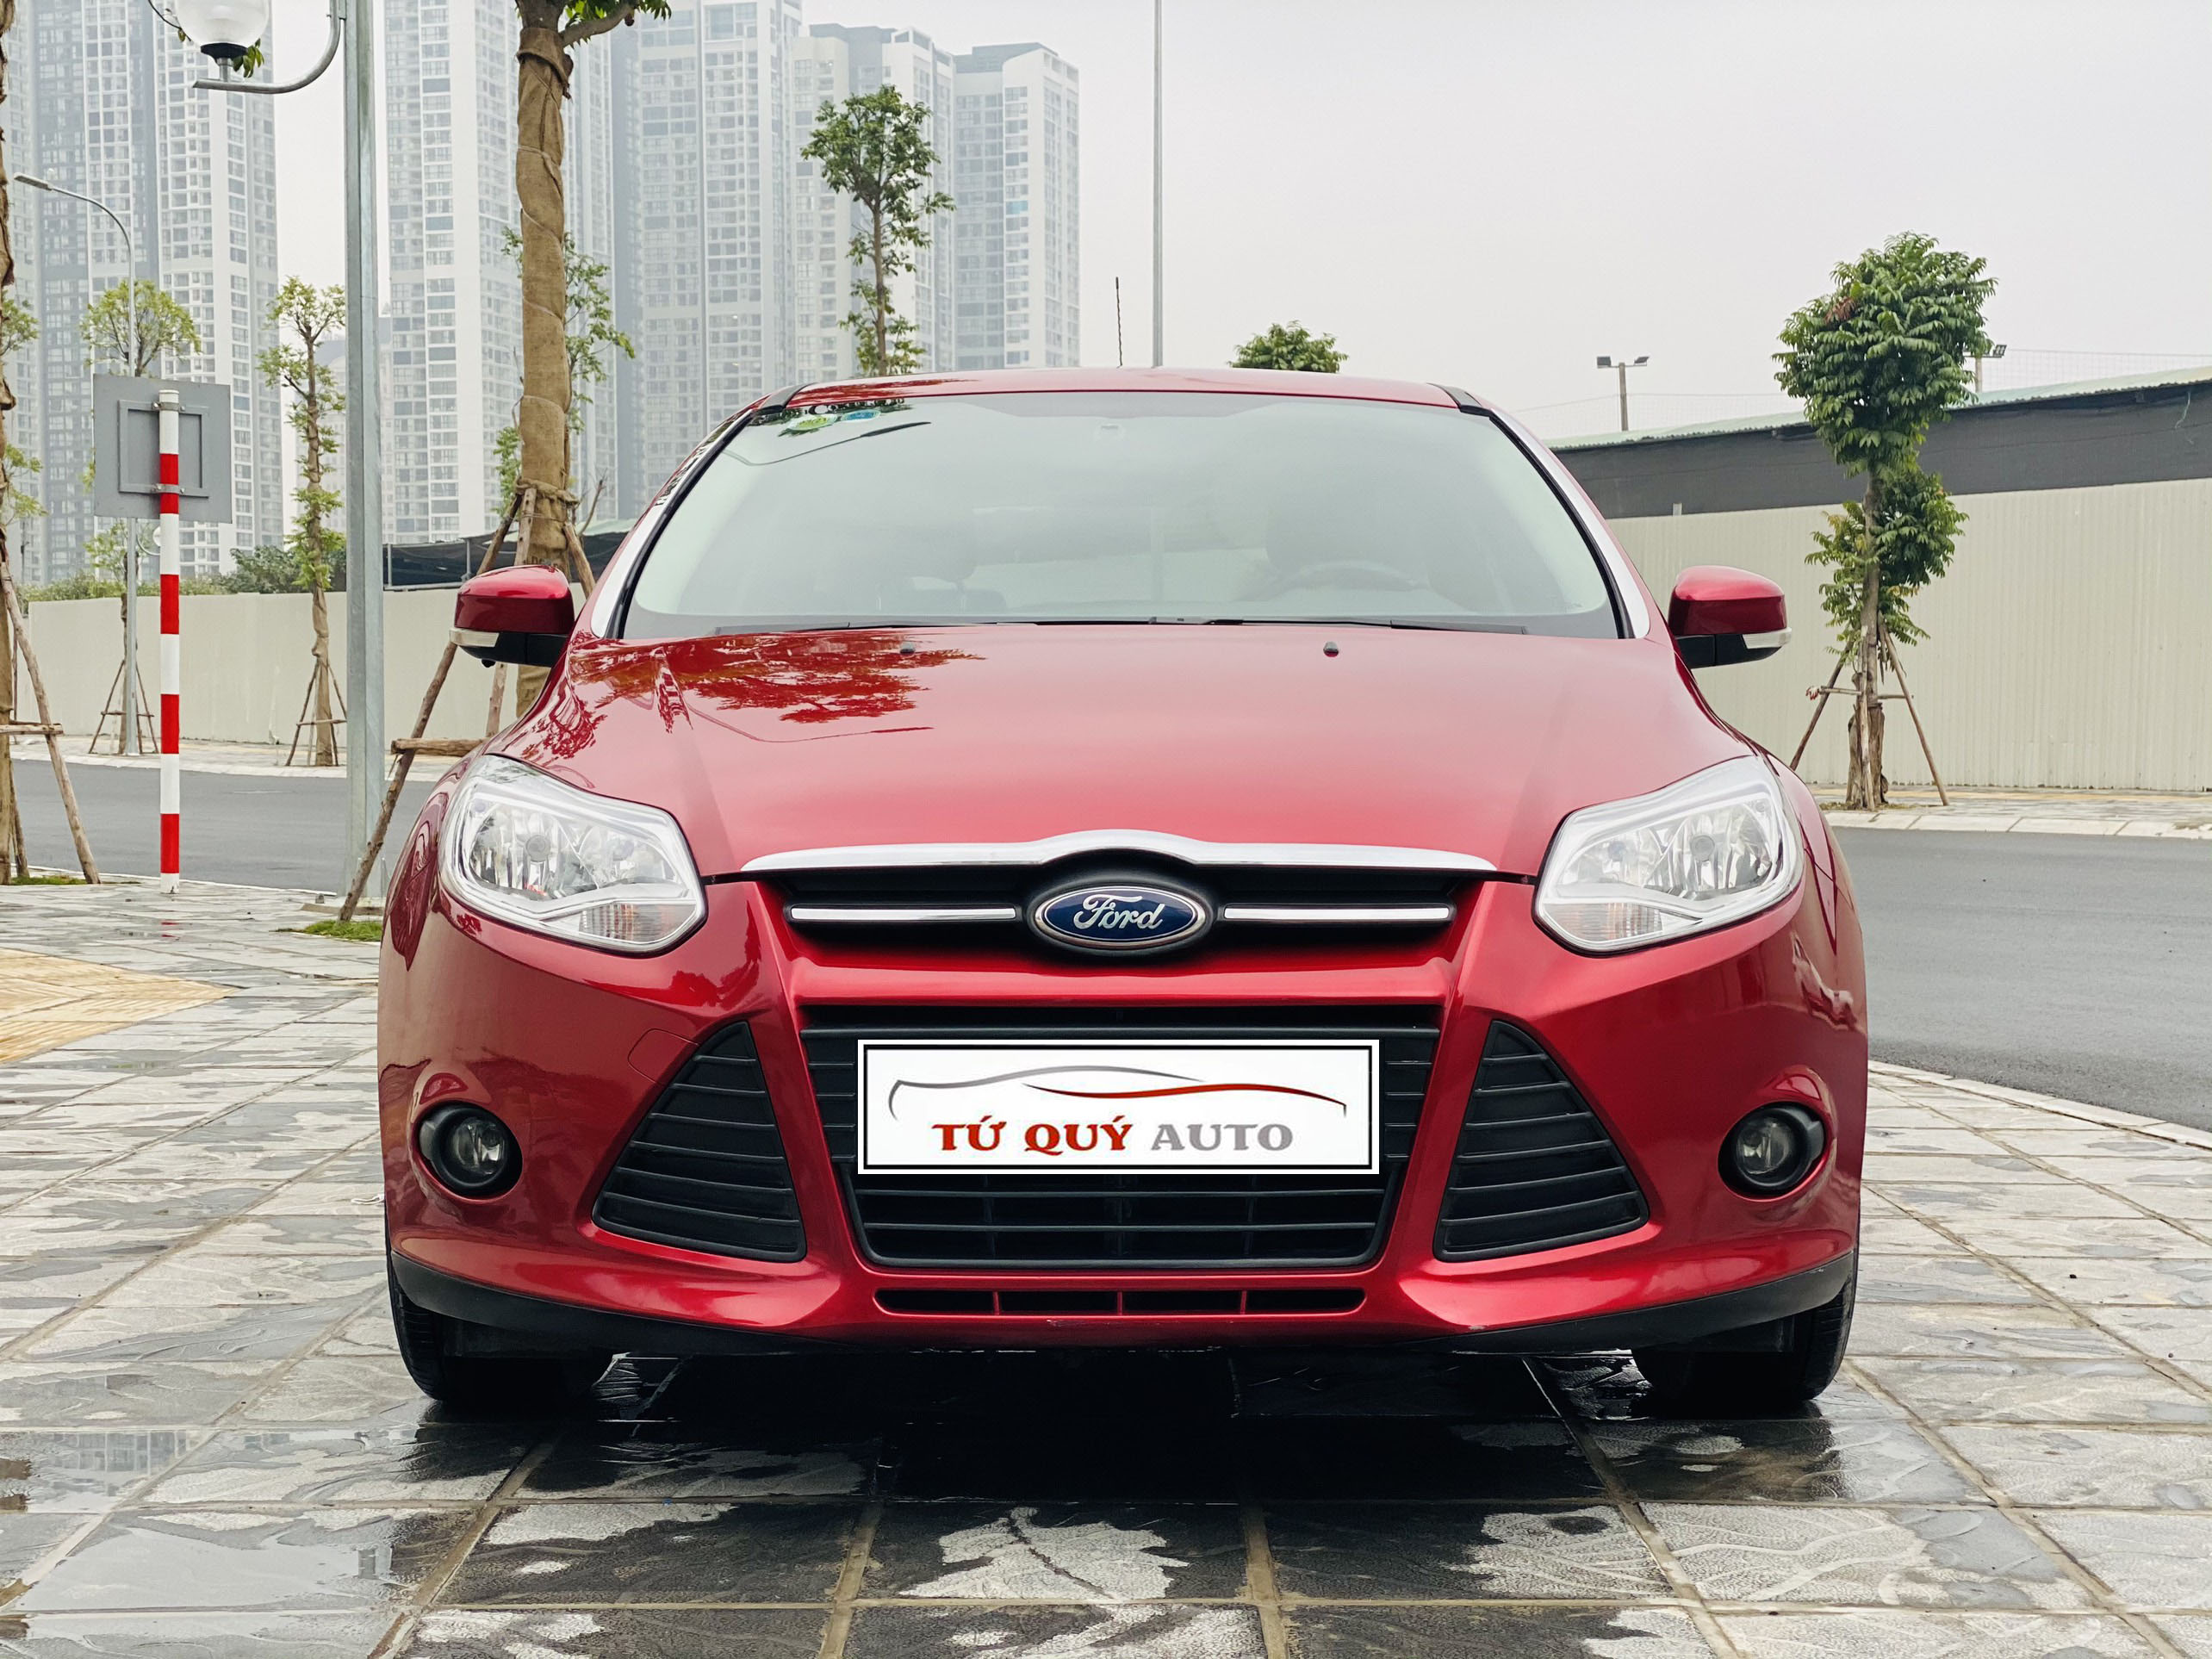 Xe Ford Focus Trend 1.6 AT 2013 - Đỏ